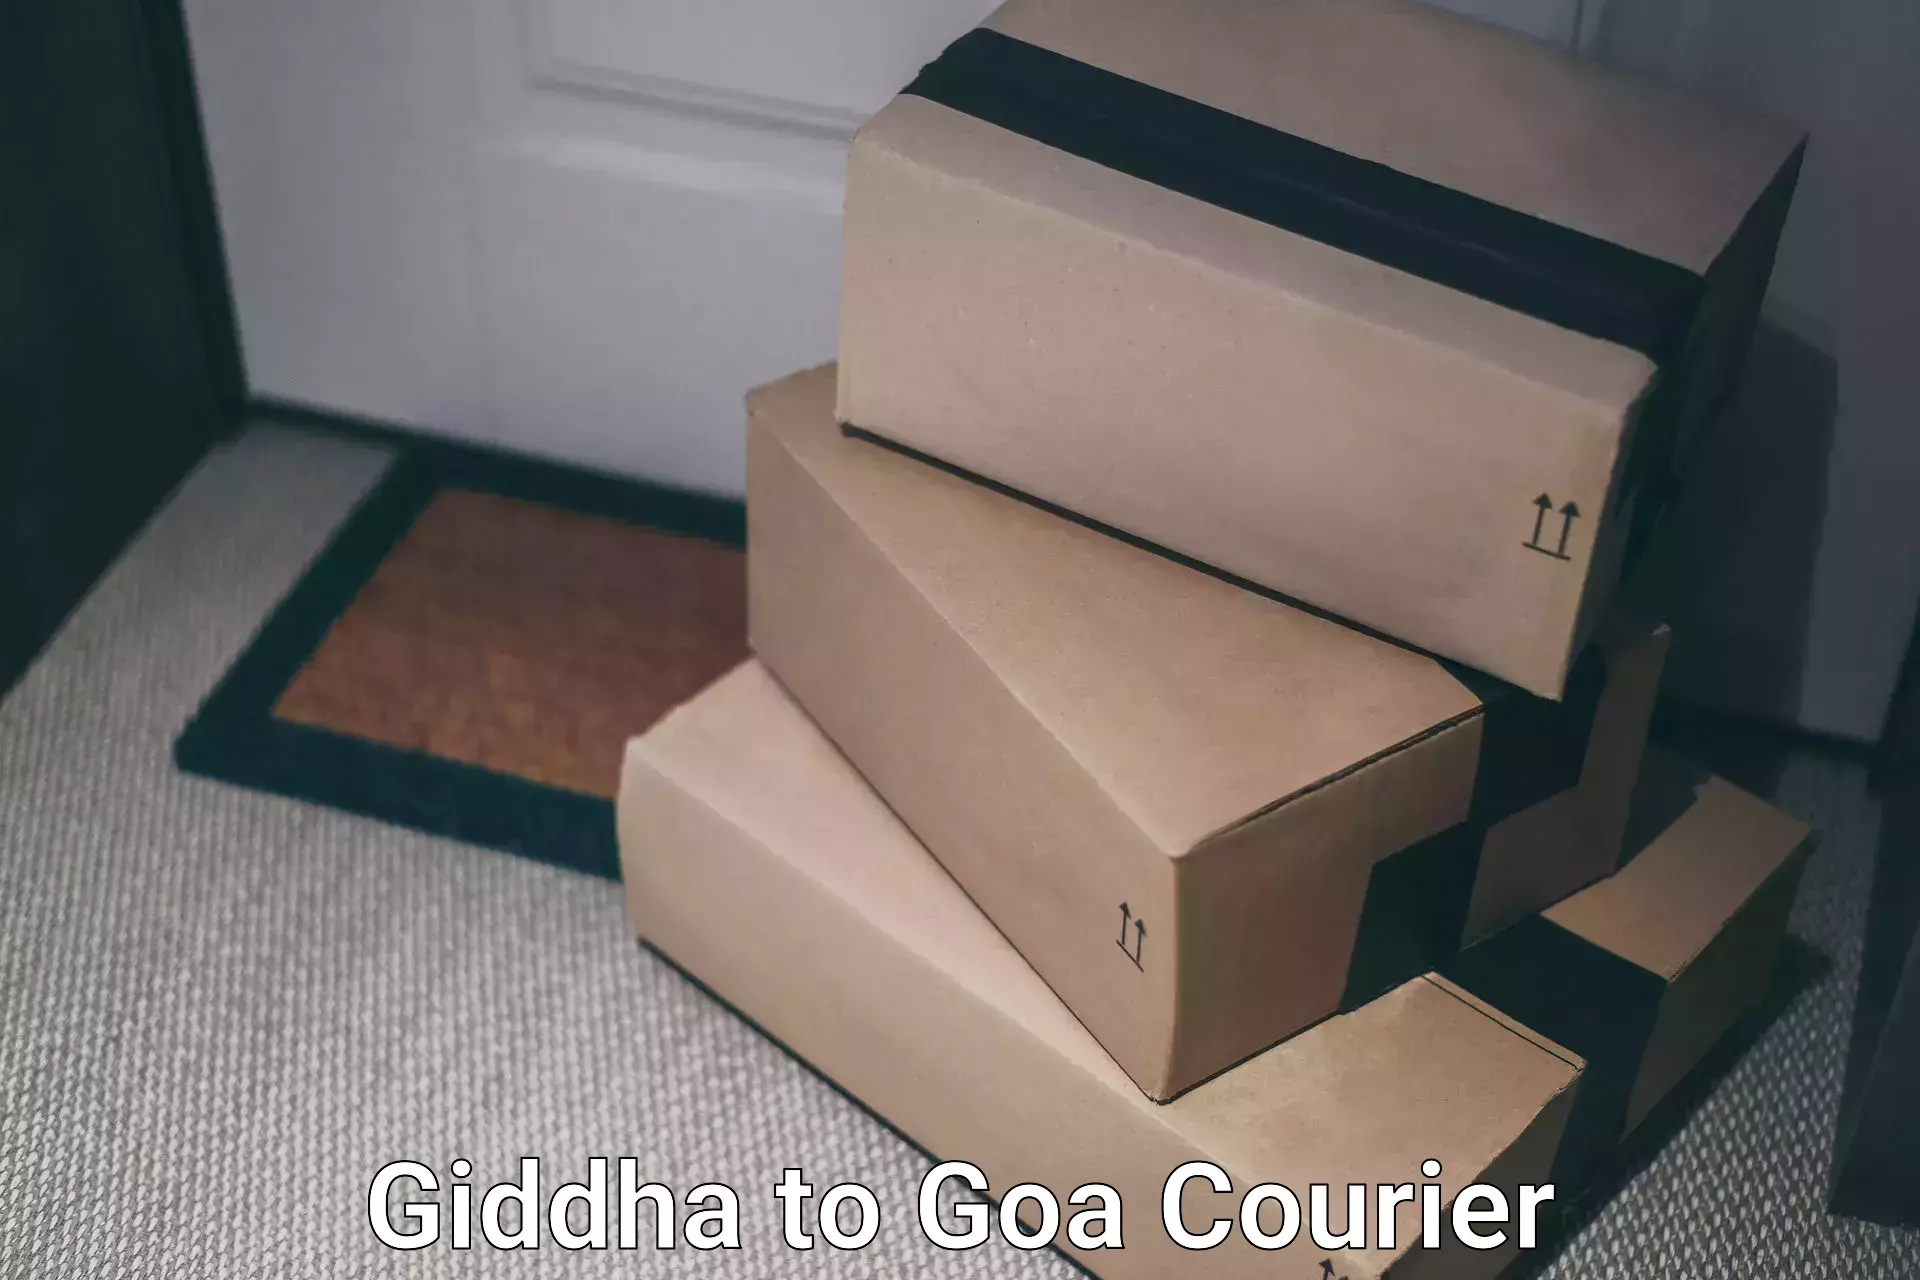 Delivery service partnership Giddha to South Goa